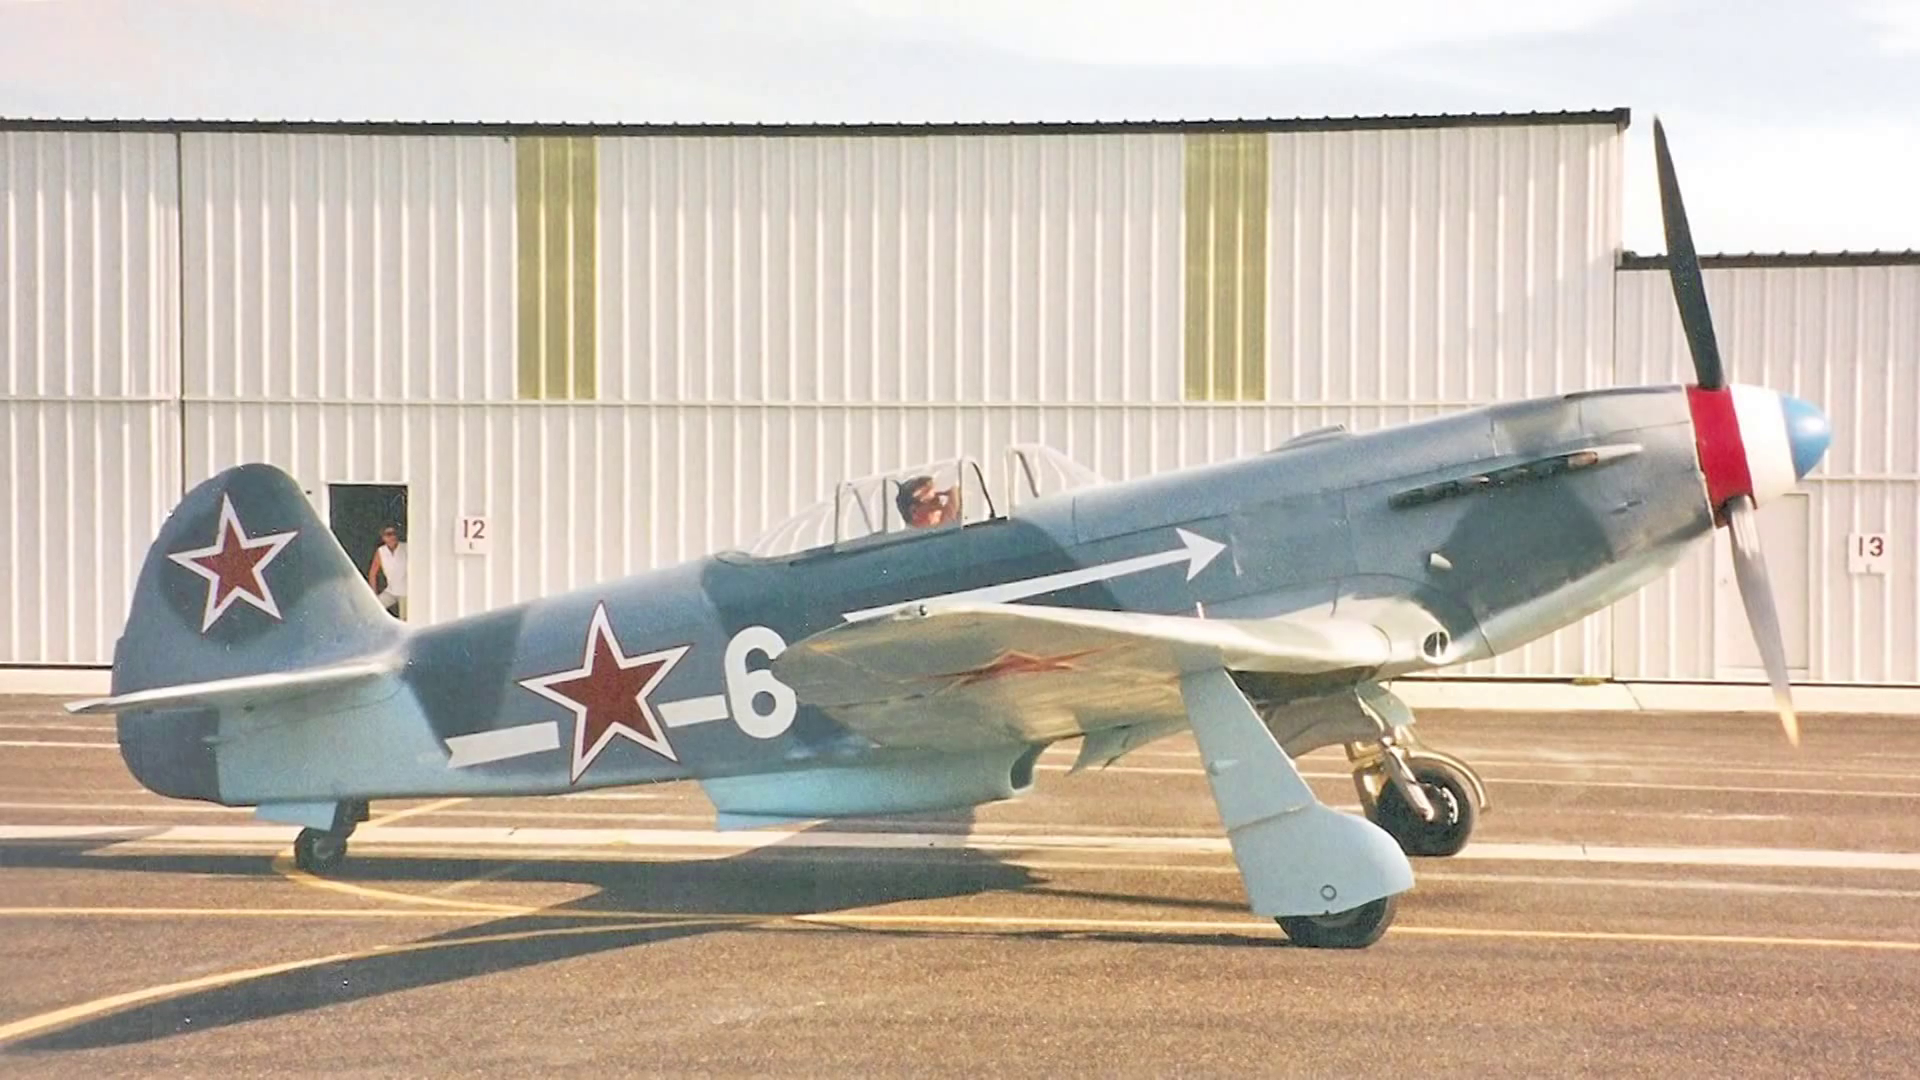 The Yakovlev Yak 3 has a wide undercarriage for stability in landing and take off.